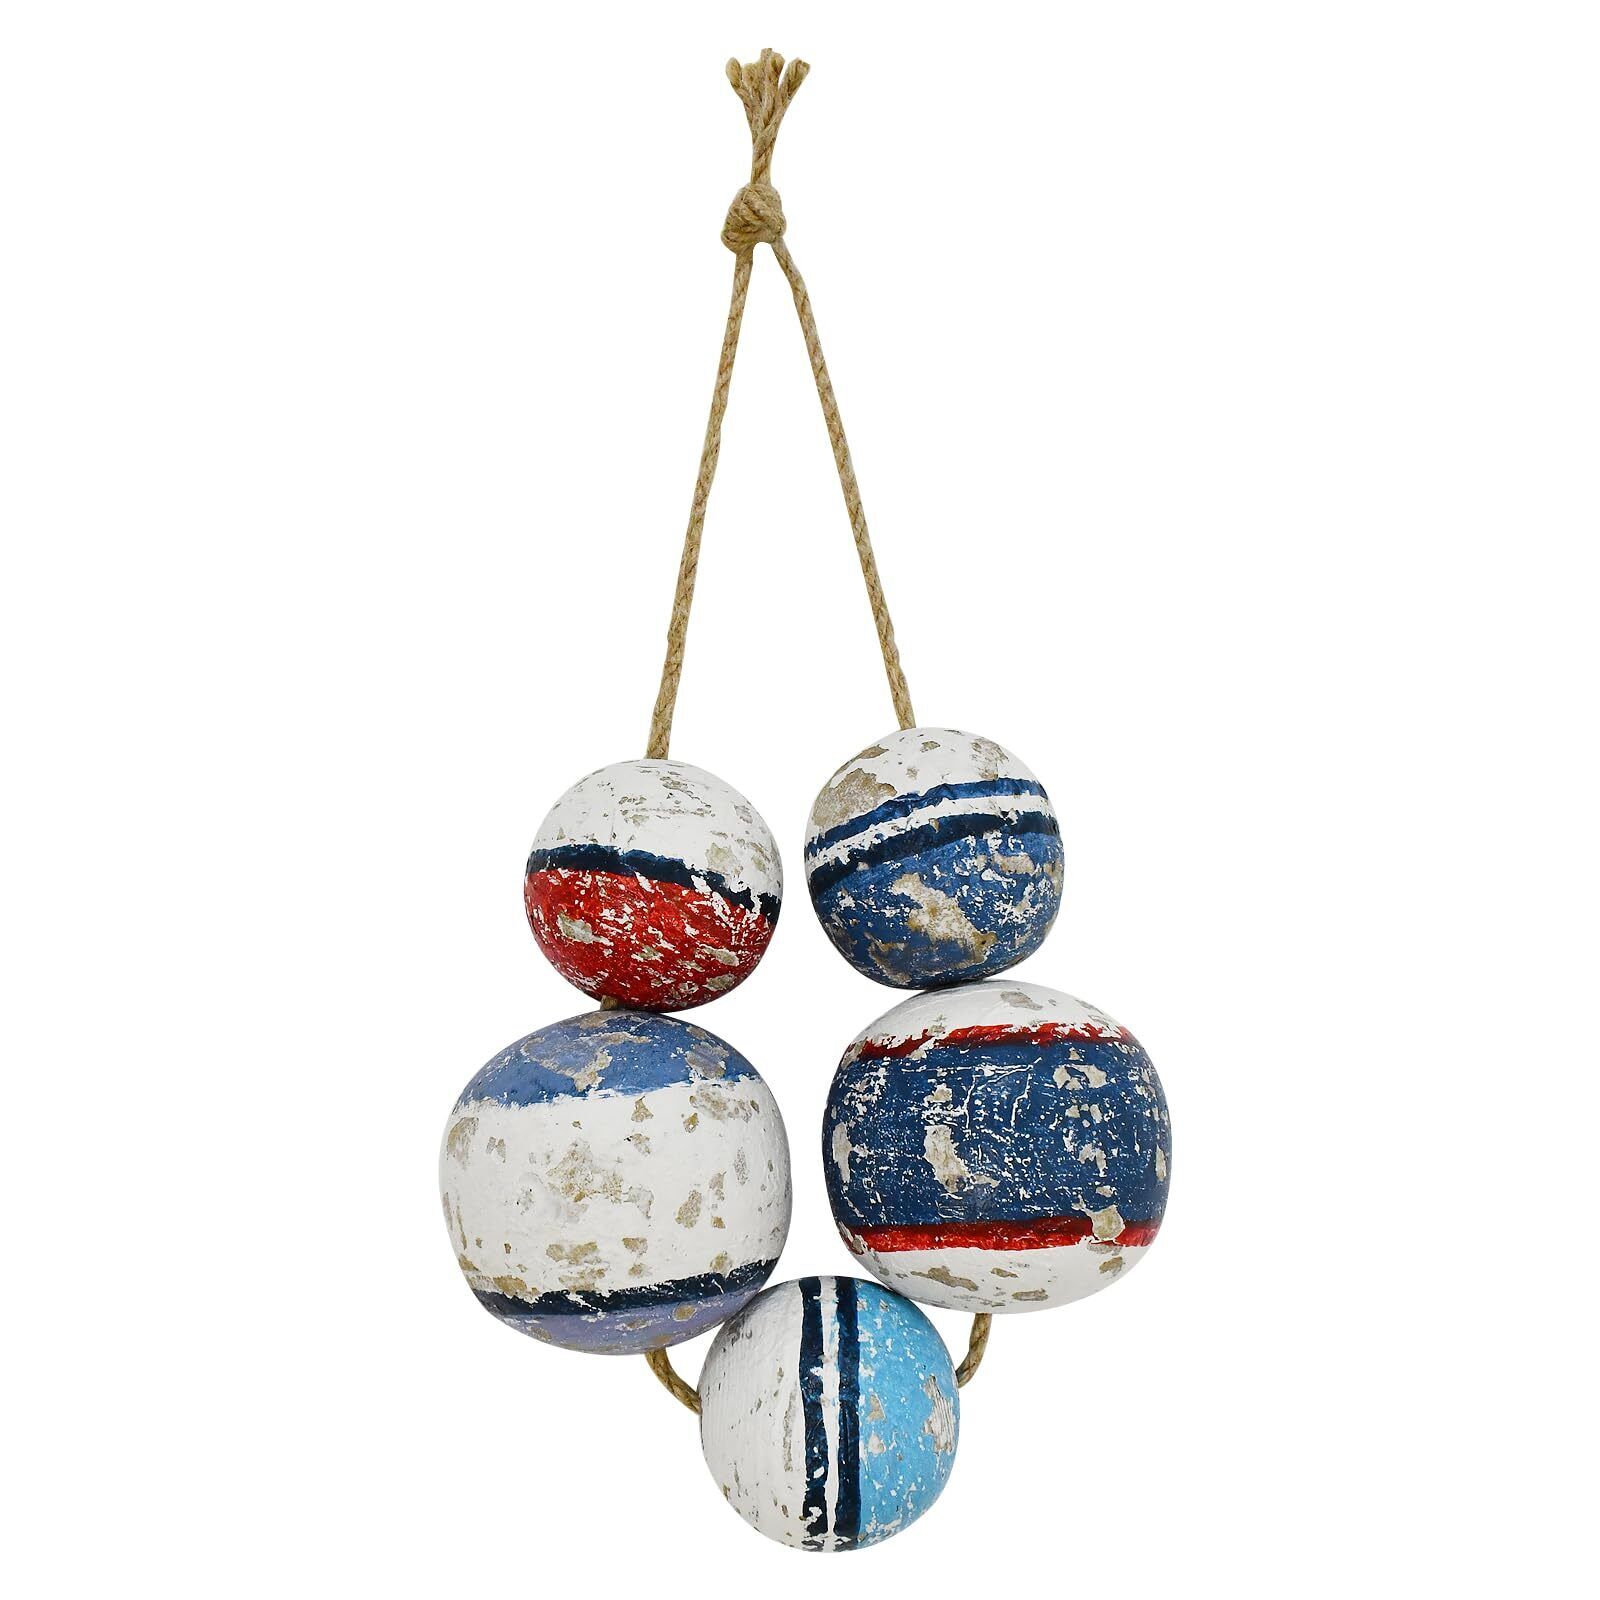 Fishing Floats Decor Wall Hanging Wooden Nautical Buoy Float Hanging Ornament...